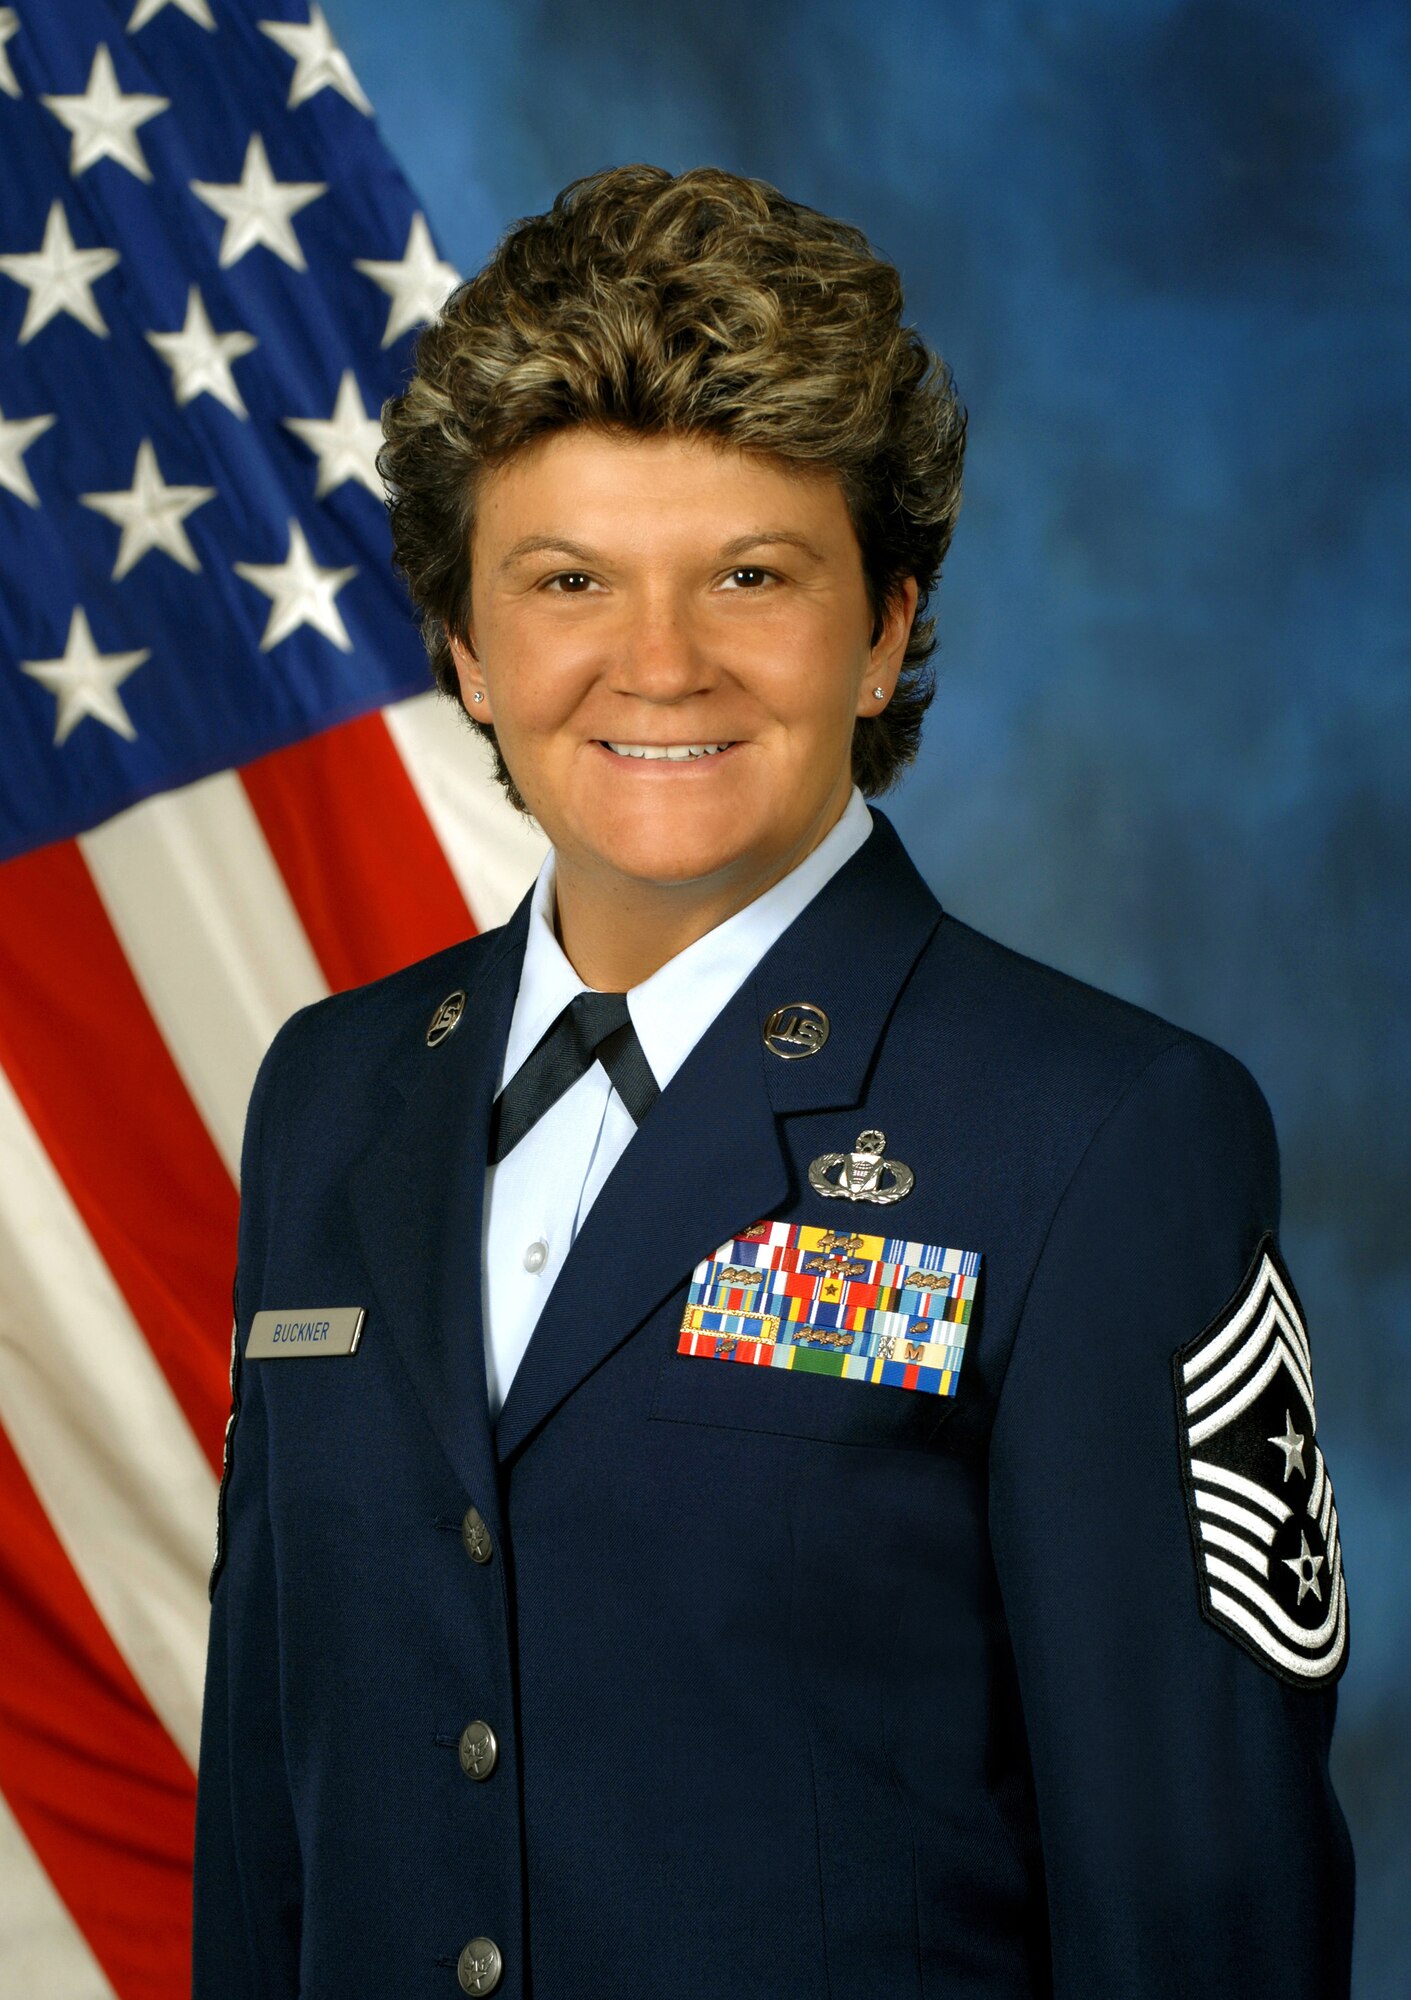 Chief Master Sgt. Kathleen R. Buckner was selected for the Air Force Reserve Command's top enlisted position. Lt. Gen. Charles E. Stenner, Jr., chief of the Air Force Reserve and AFRC commander, made the selection Dec. 23.  (U.S. Air Force/file photo)